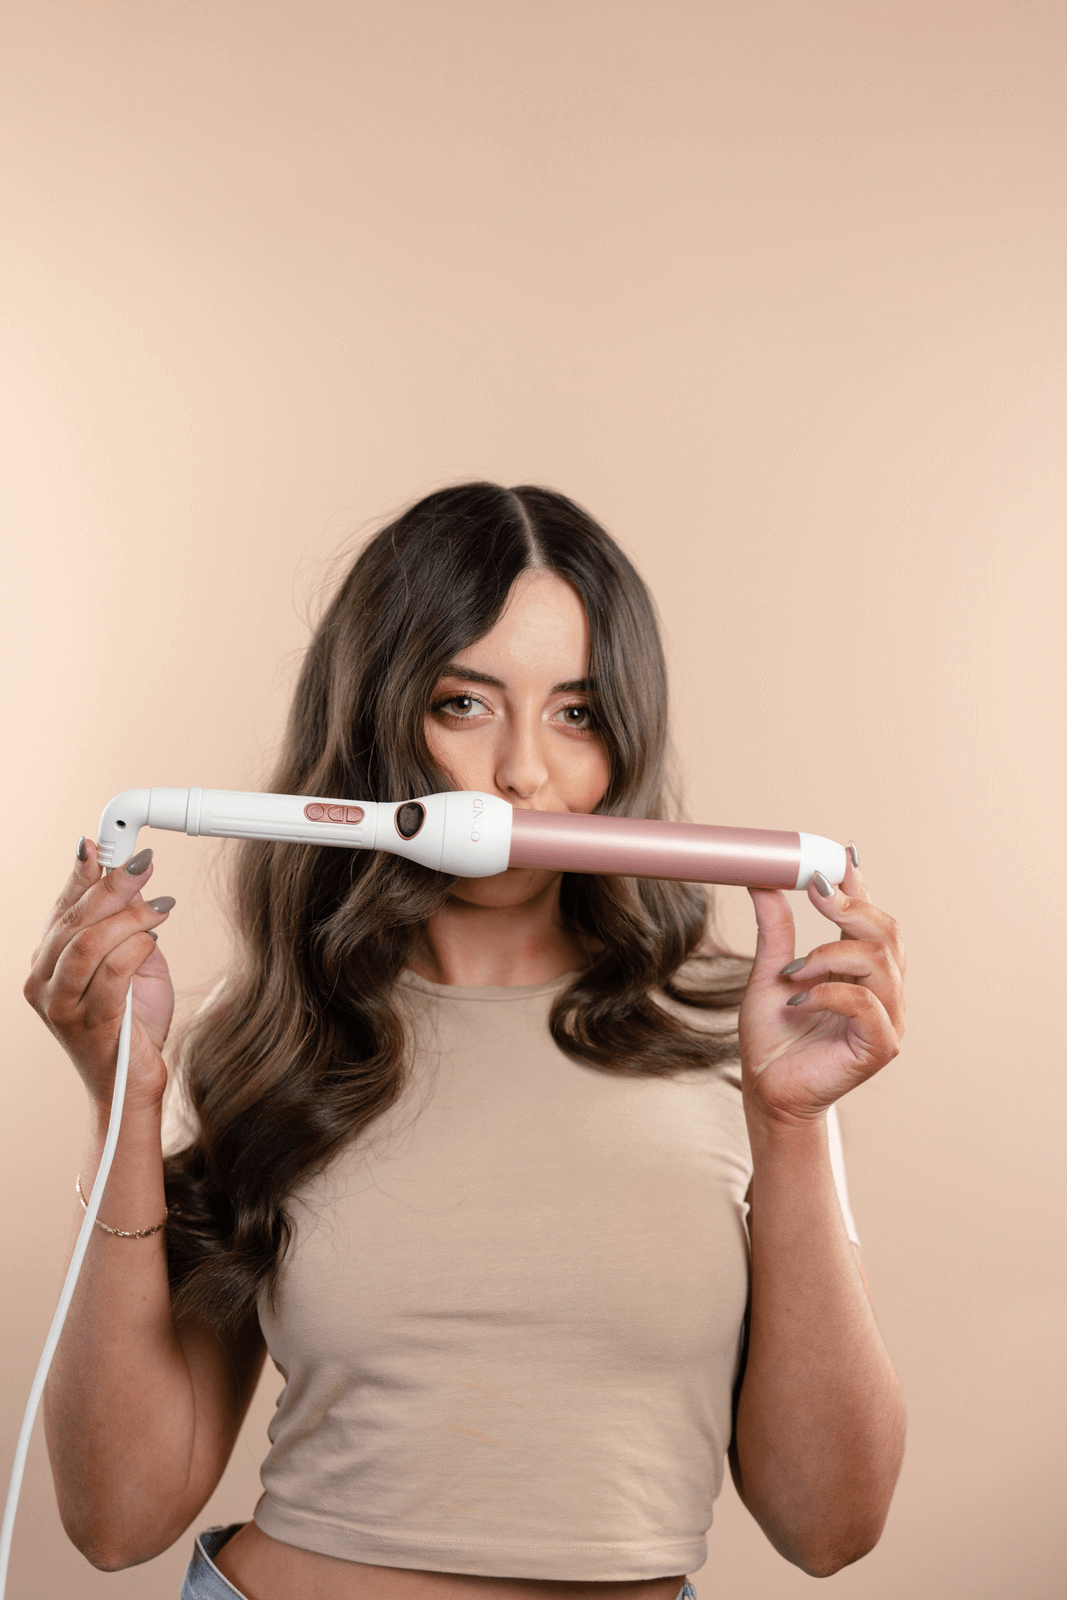 A photo of the Cinco styling wand which can create mermaid waves